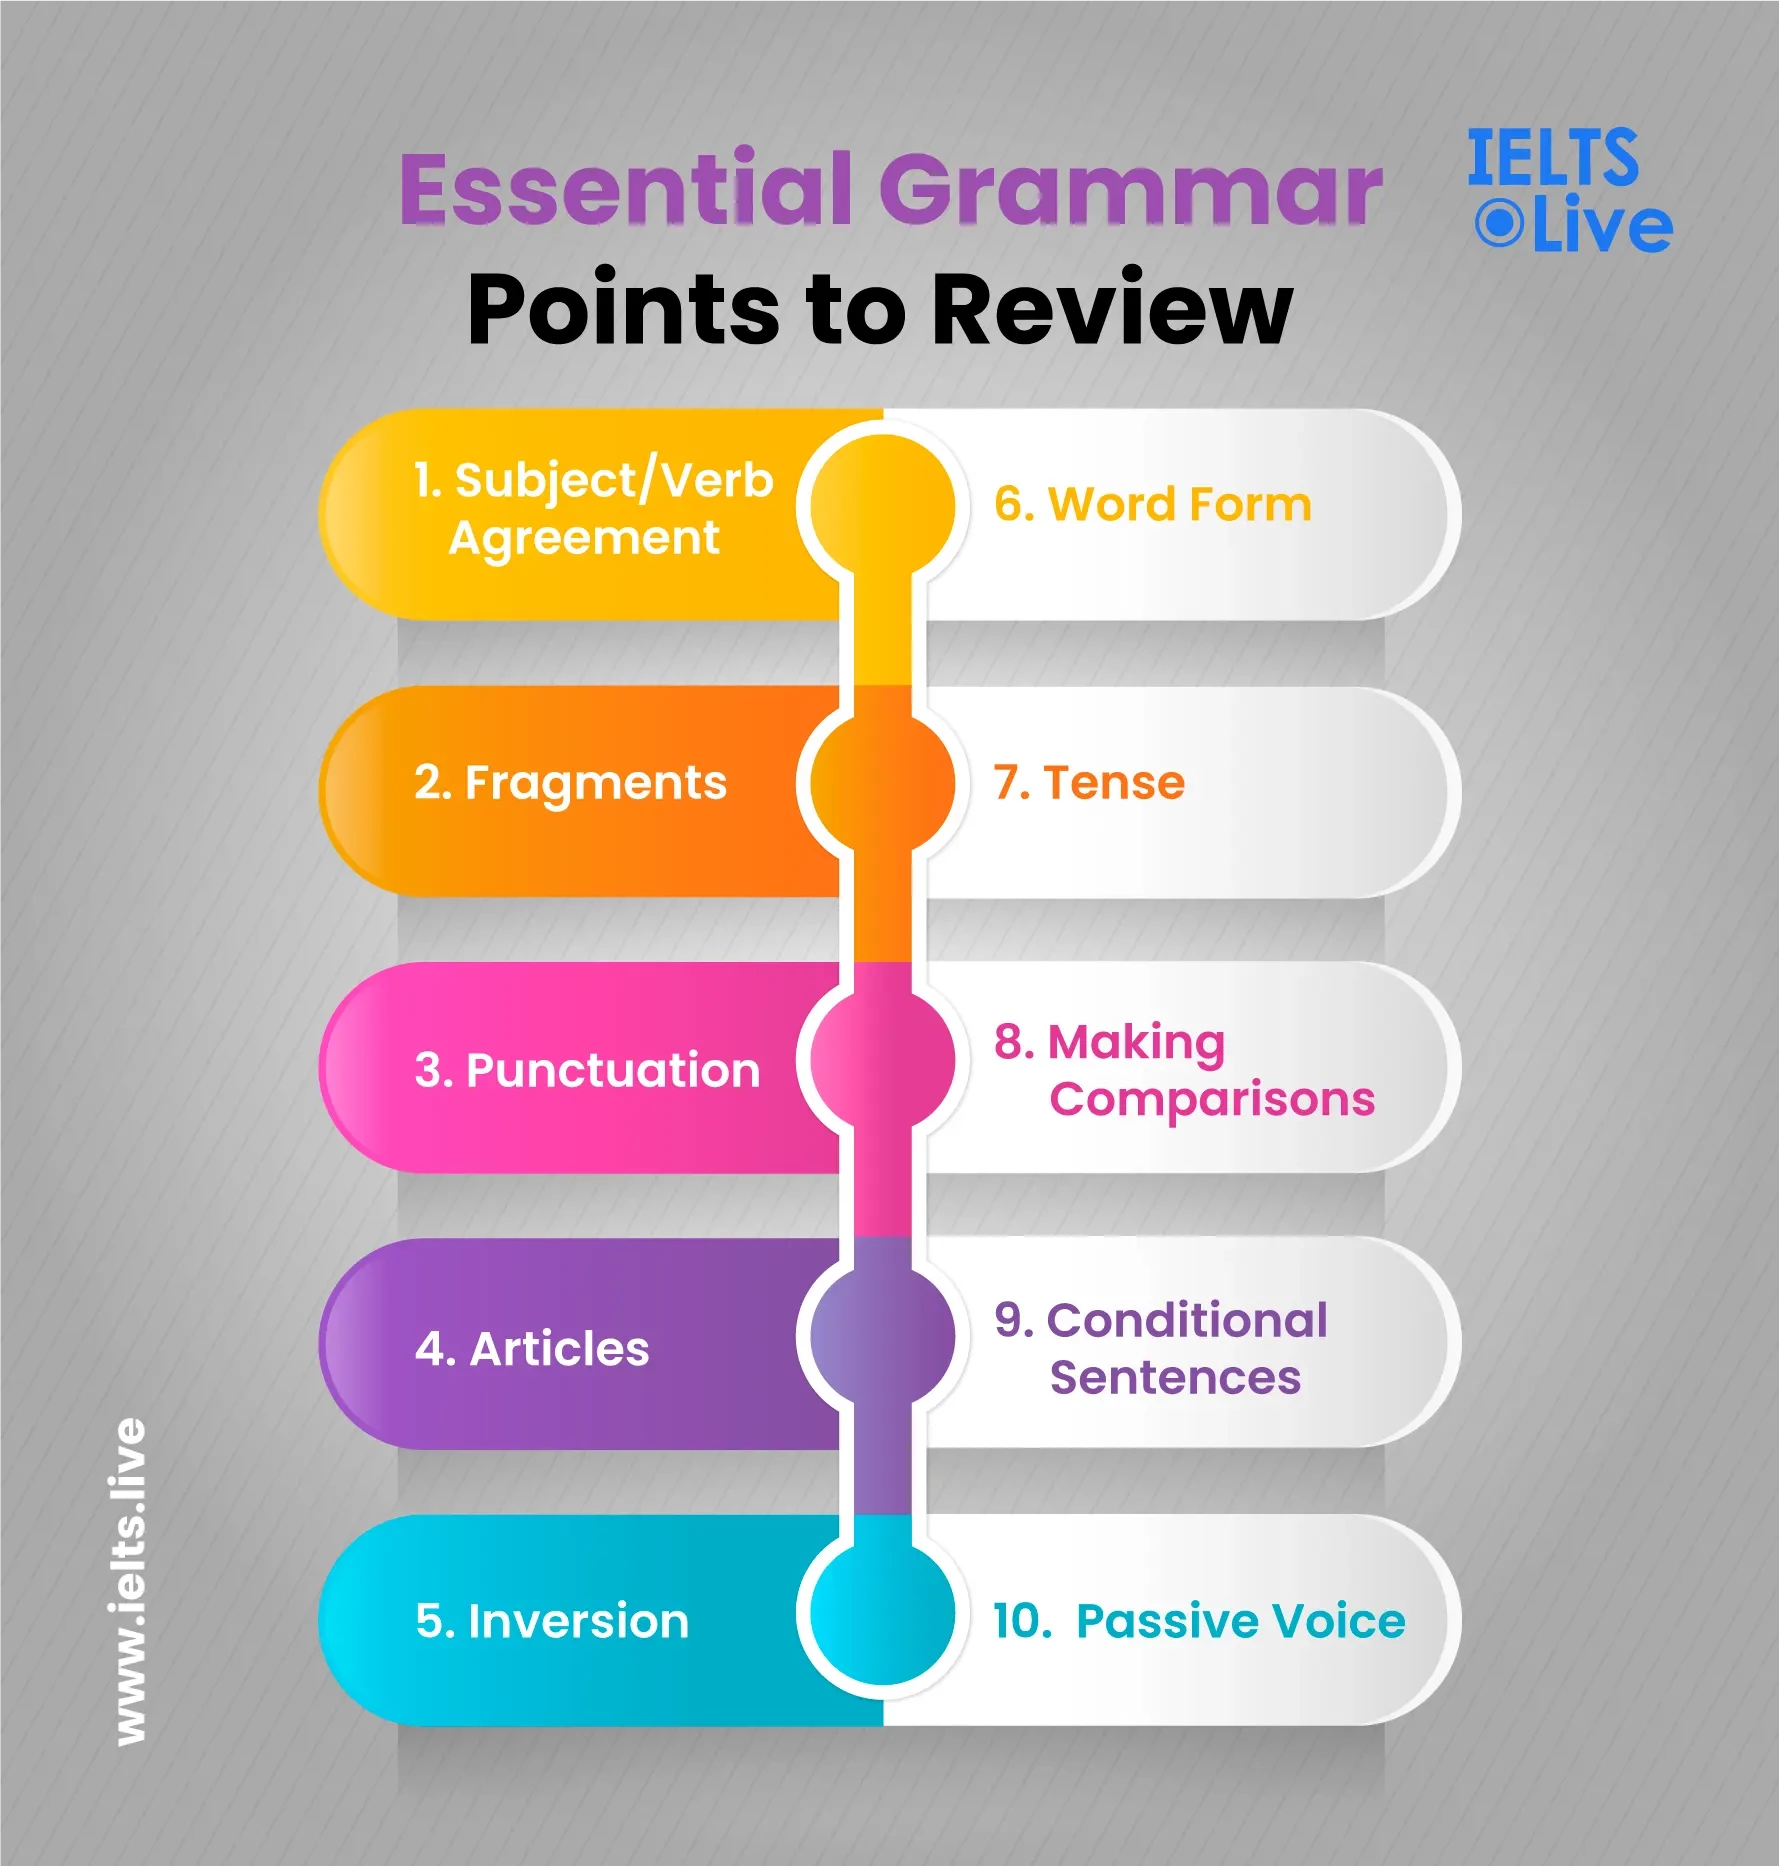 Essential Grammar Points to Review